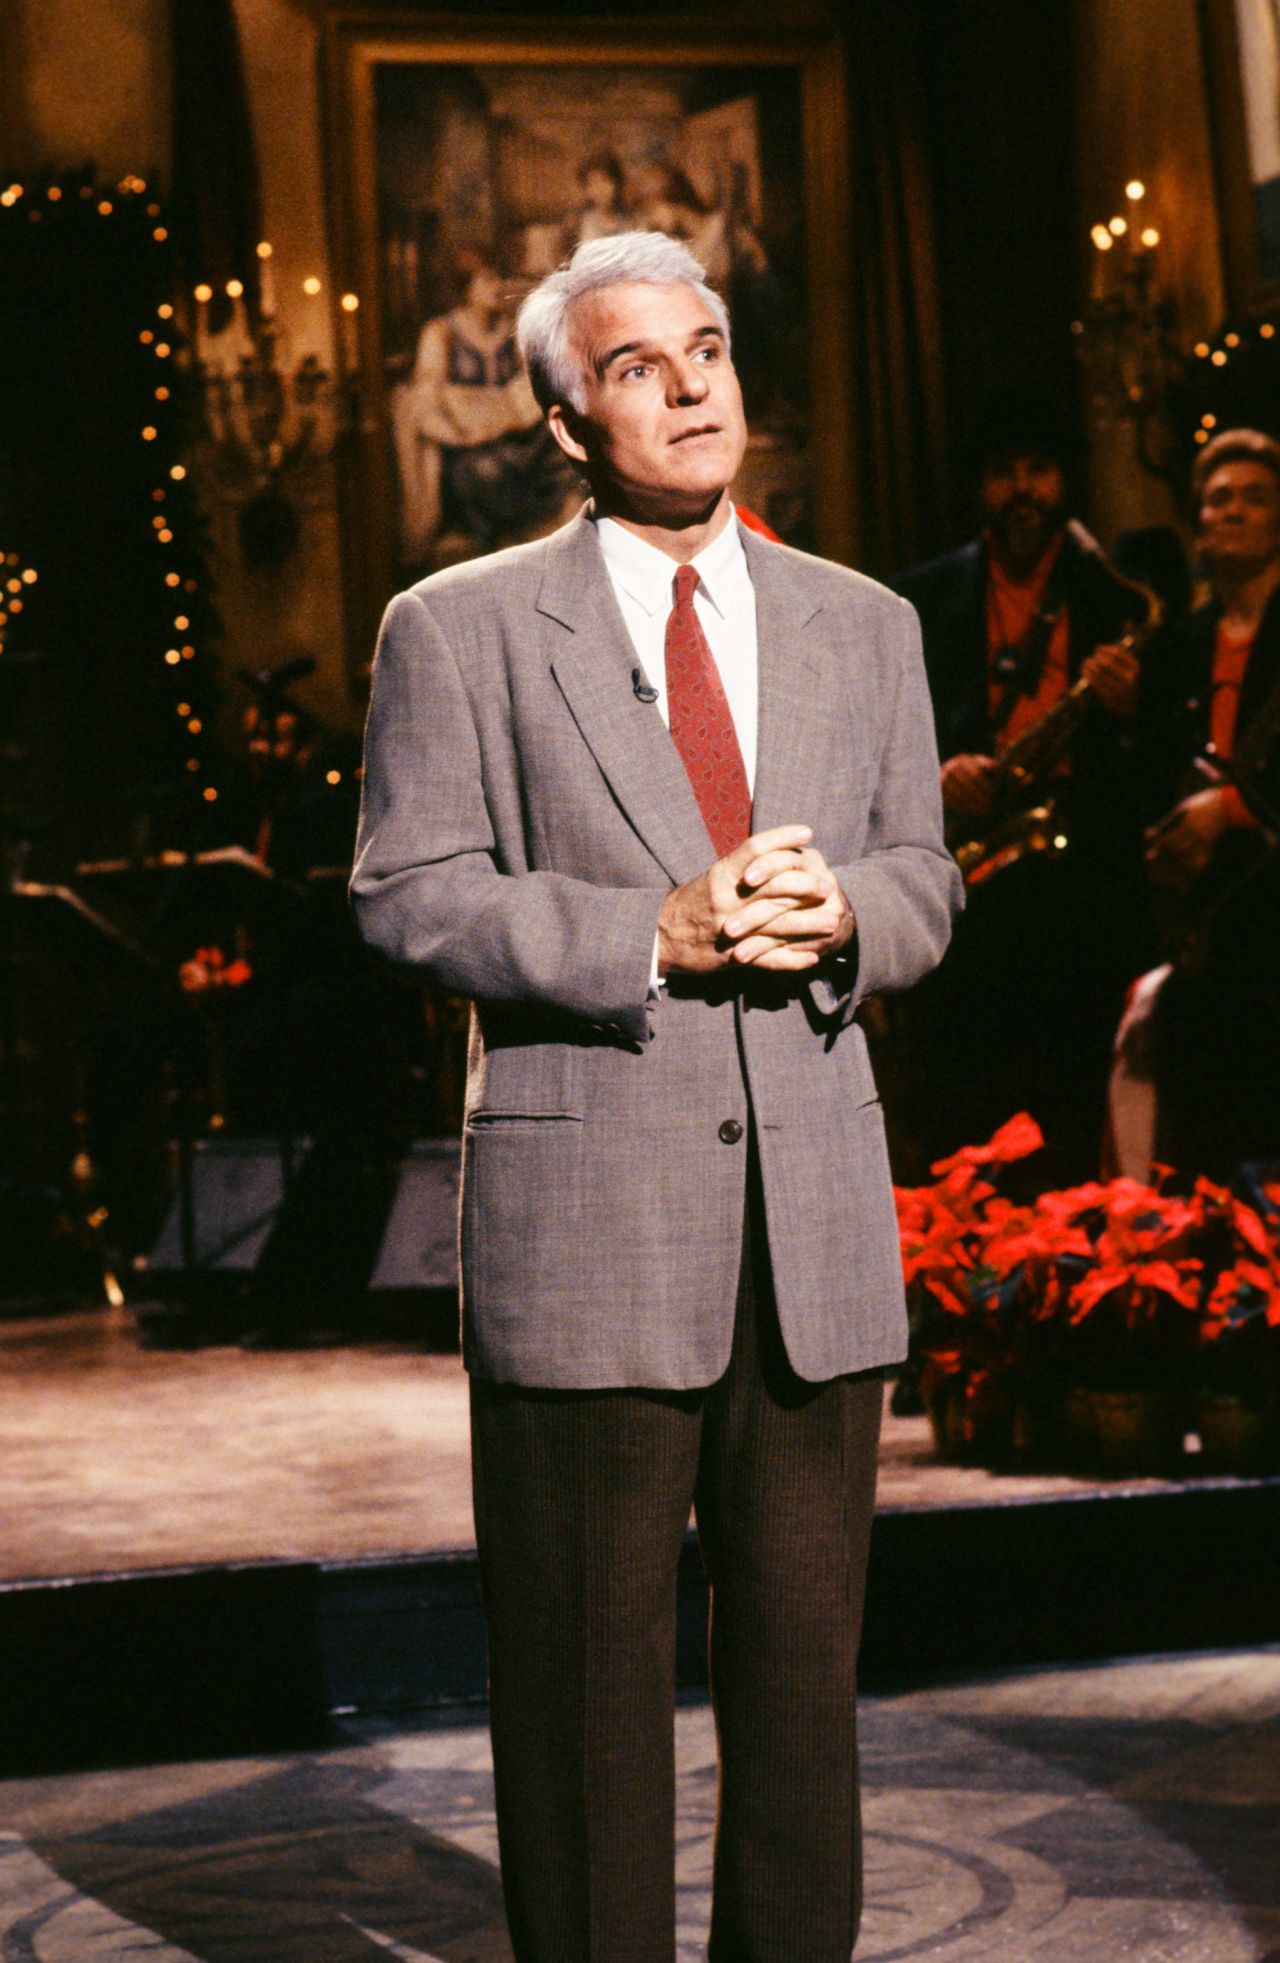 Martin delivers his monologue while hosting an episode in 1991.